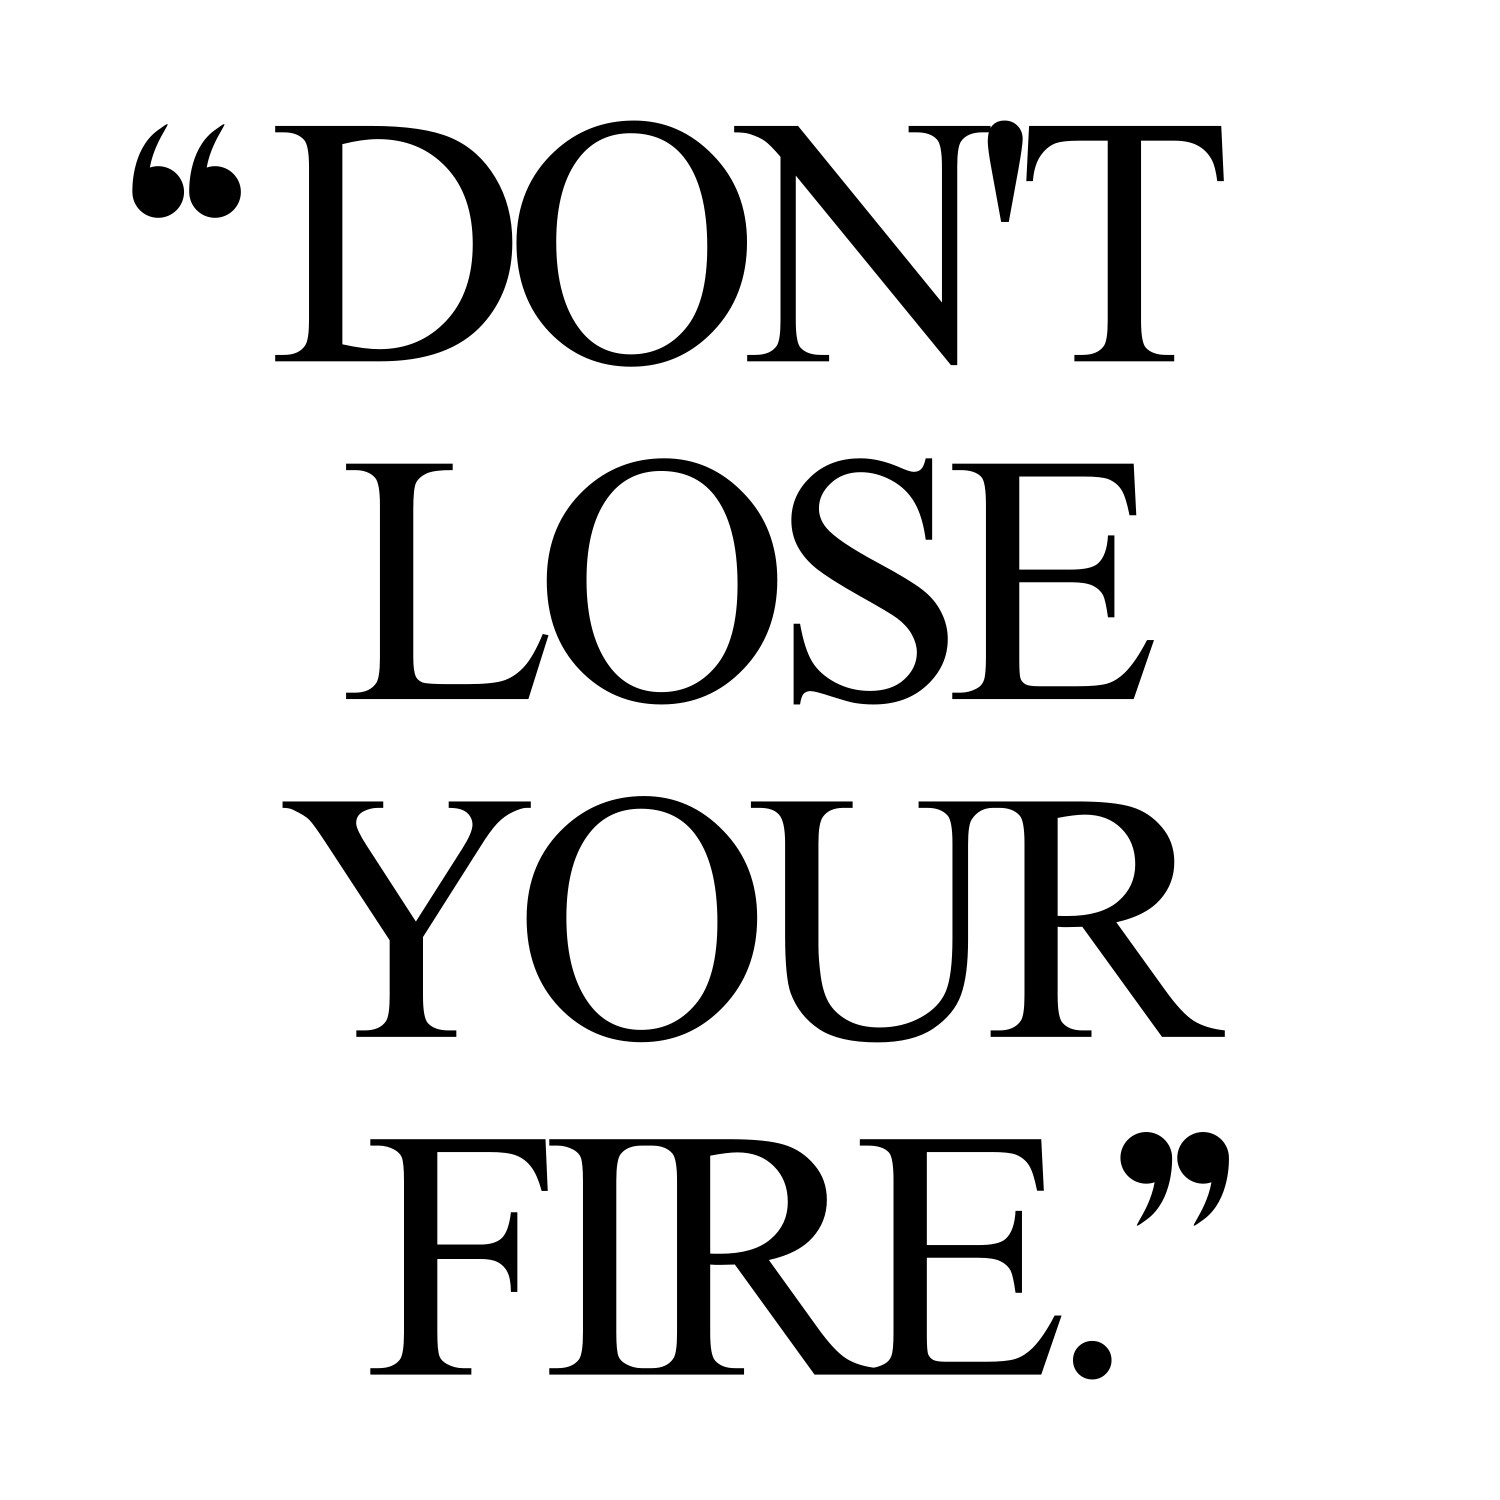 Don't lose your fire! Browse our collection of motivational exercise and training quotes and get instant health and fitness inspiration. Transform positive thoughts into positive actions and get fit, healthy and happy! https://www.spotebi.com/workout-motivation/dont-lose-your-fire-exercise-and-training-quote/